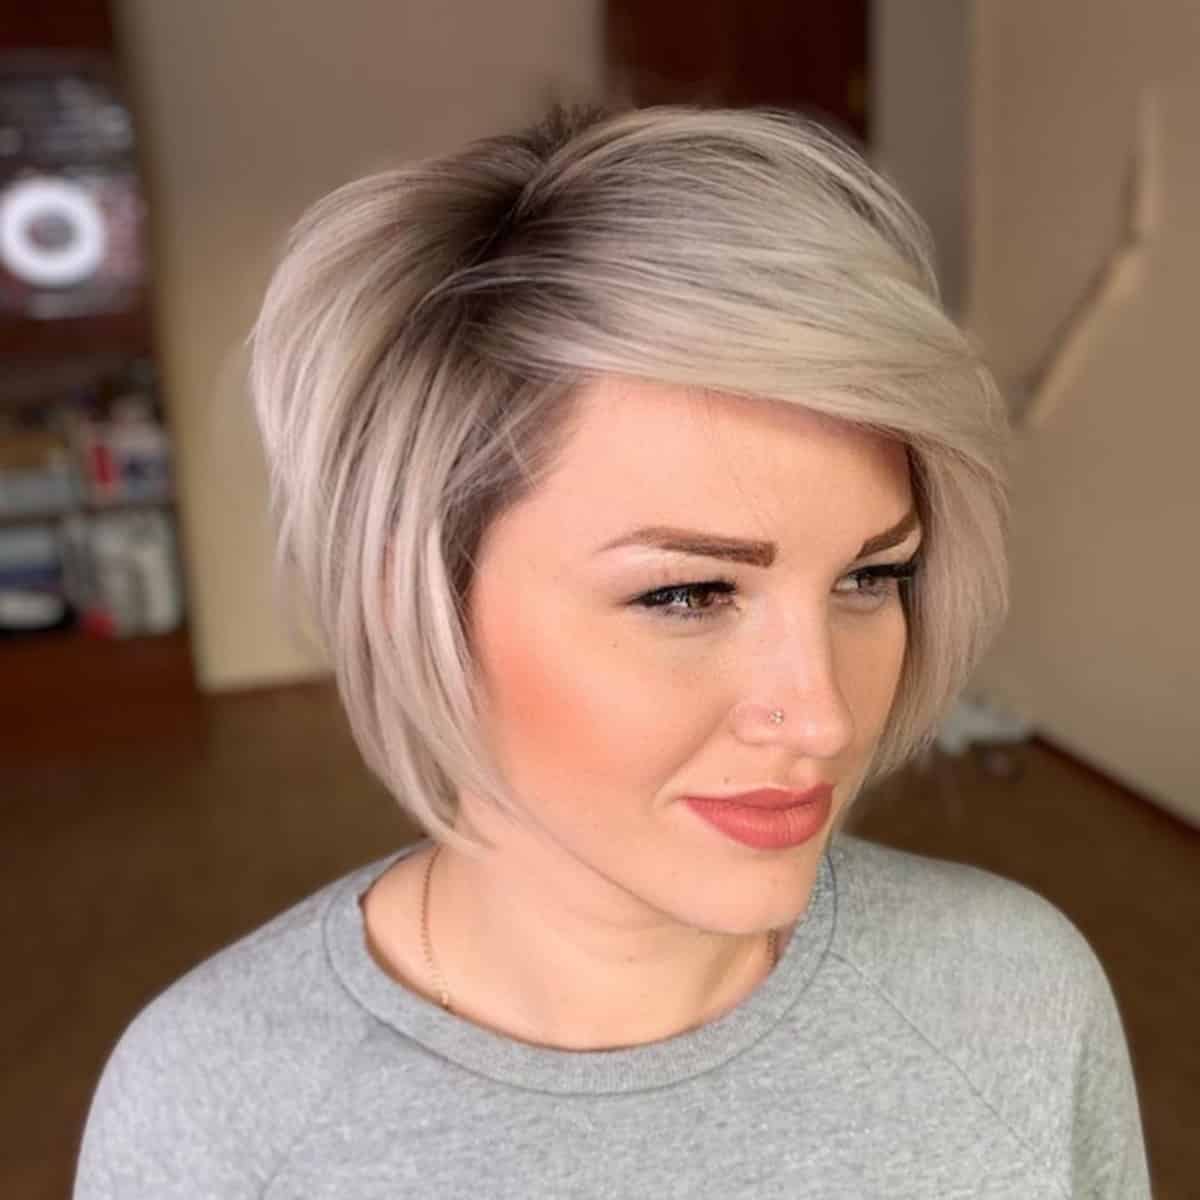 Edgy short cut for a thin hair type